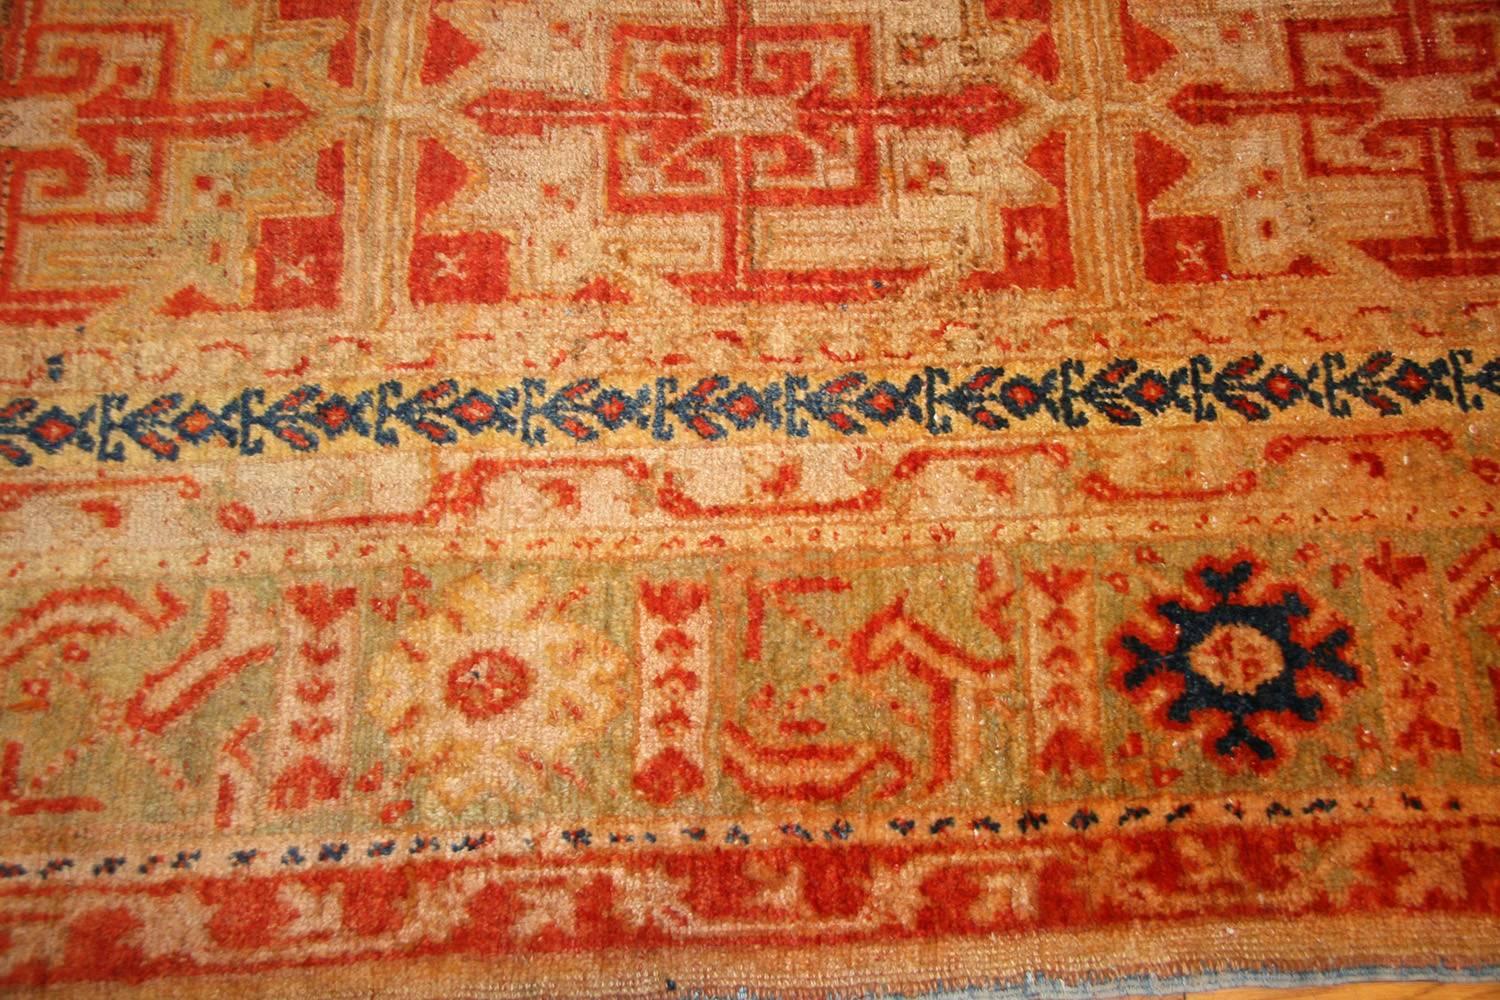 Beautiful Antique Oushak Rug, Country of Origin / Rug Type: Turkish Rug, Circa Date: 1900 – Size: 4 ft x 9 ft 6 in (1.22 m x 2.9 m)

